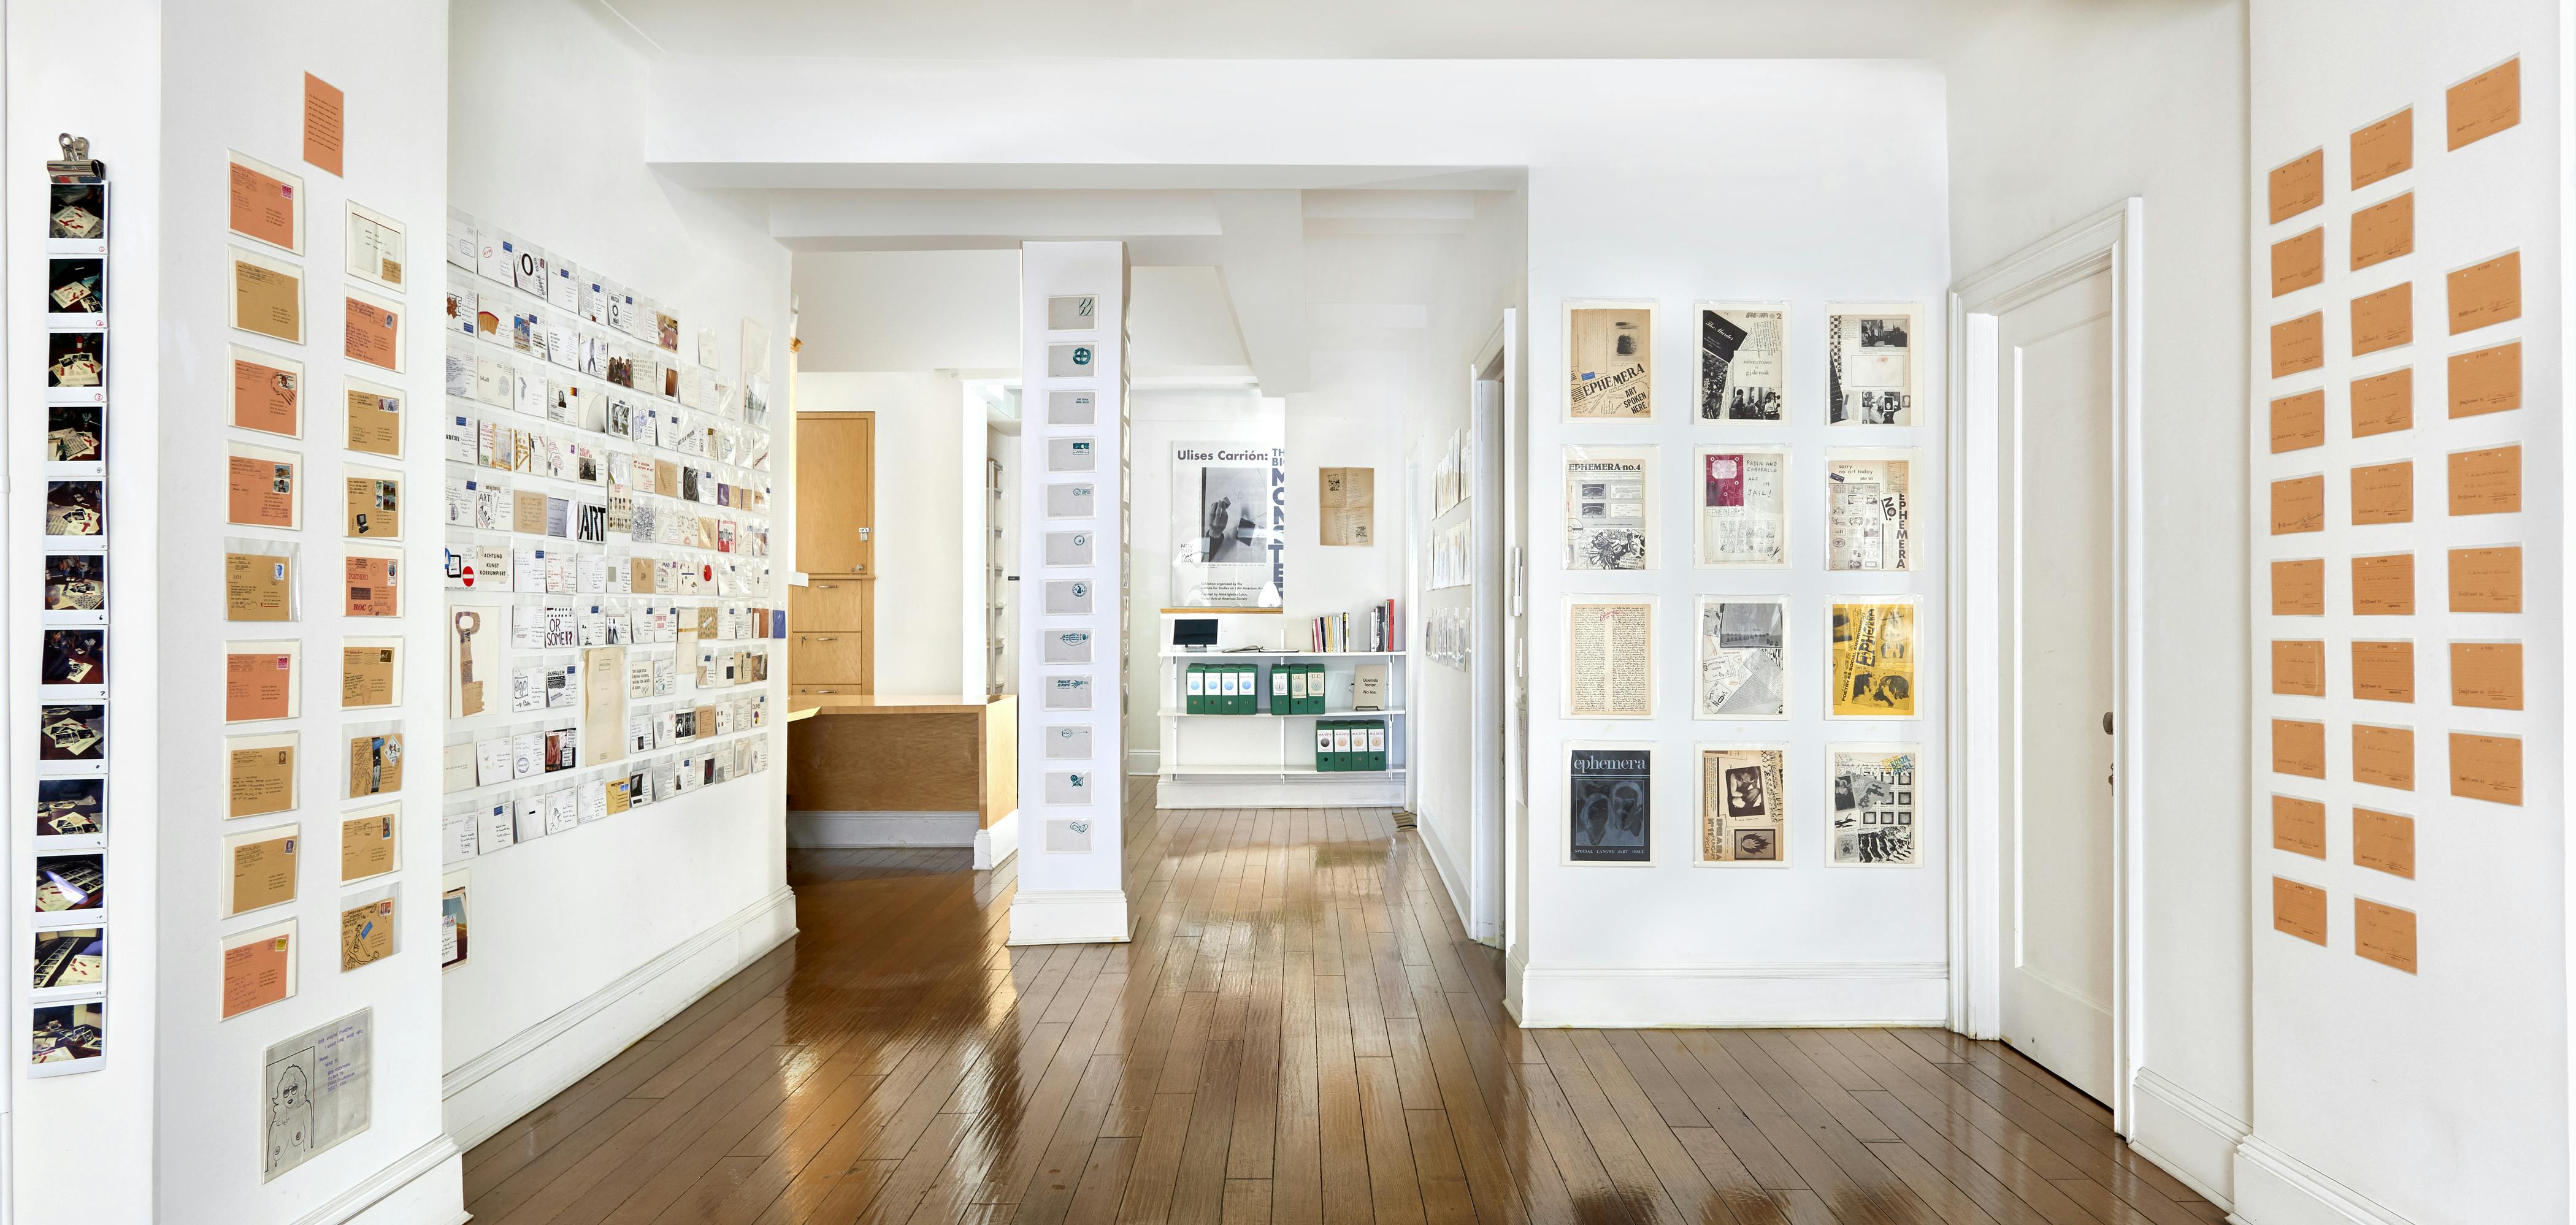 Installation view of Ulises Carrión: The Big Monster exhibition showing envelopes, photographs, and various objects mounted to the gallery walls.